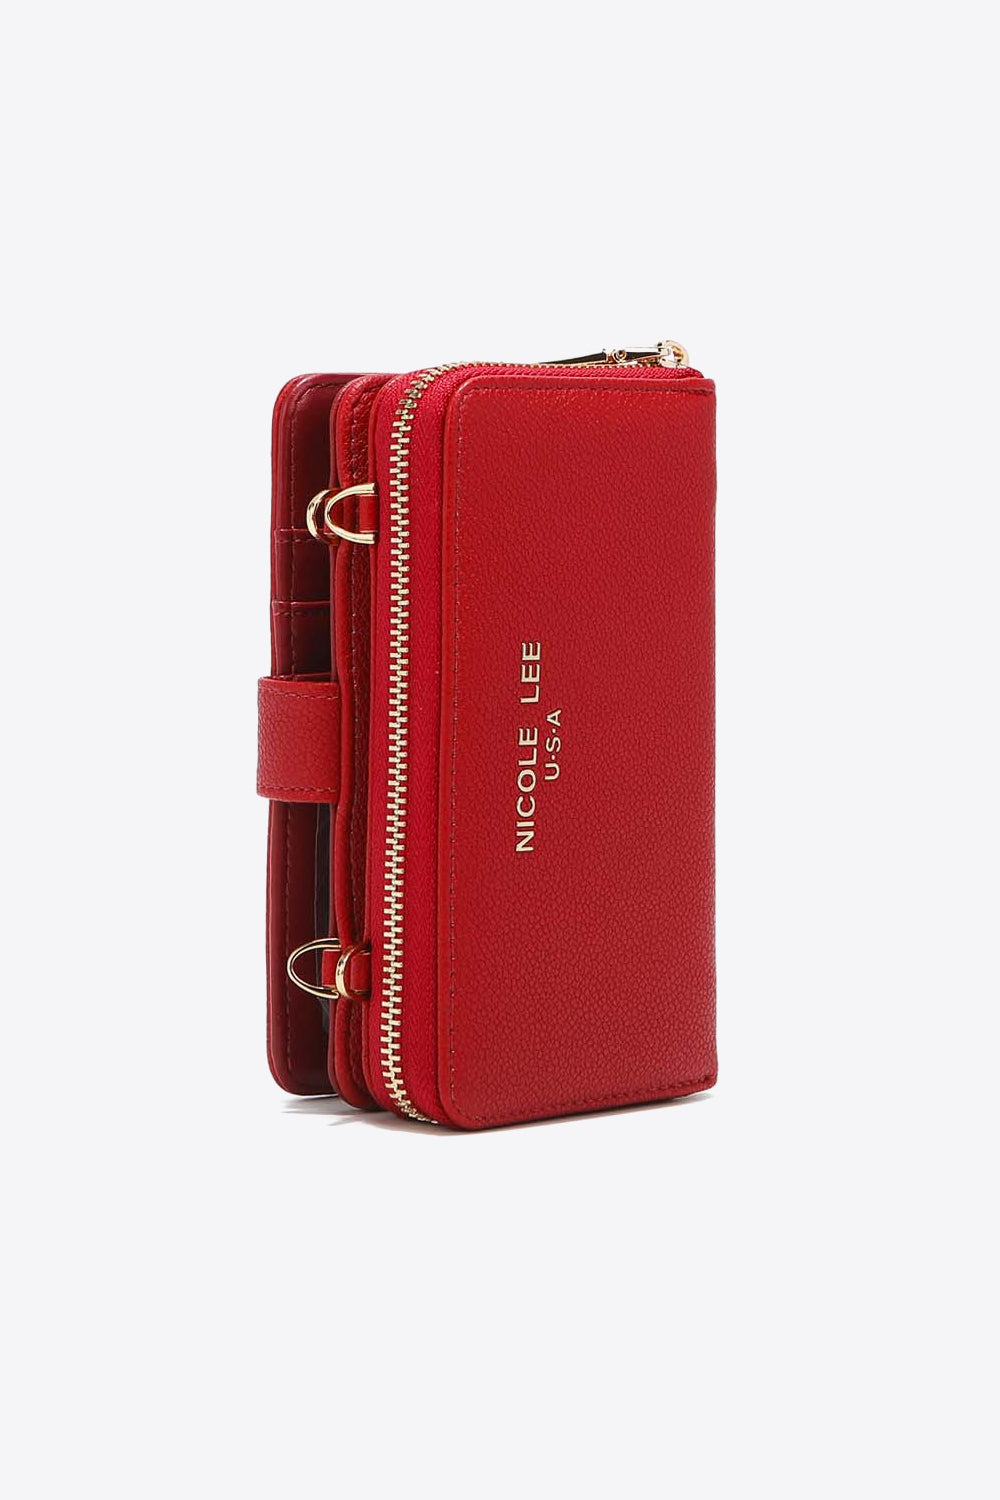 Nicole Lee USA Two-Piece Crossbody Phone Case Wallet - Online Only